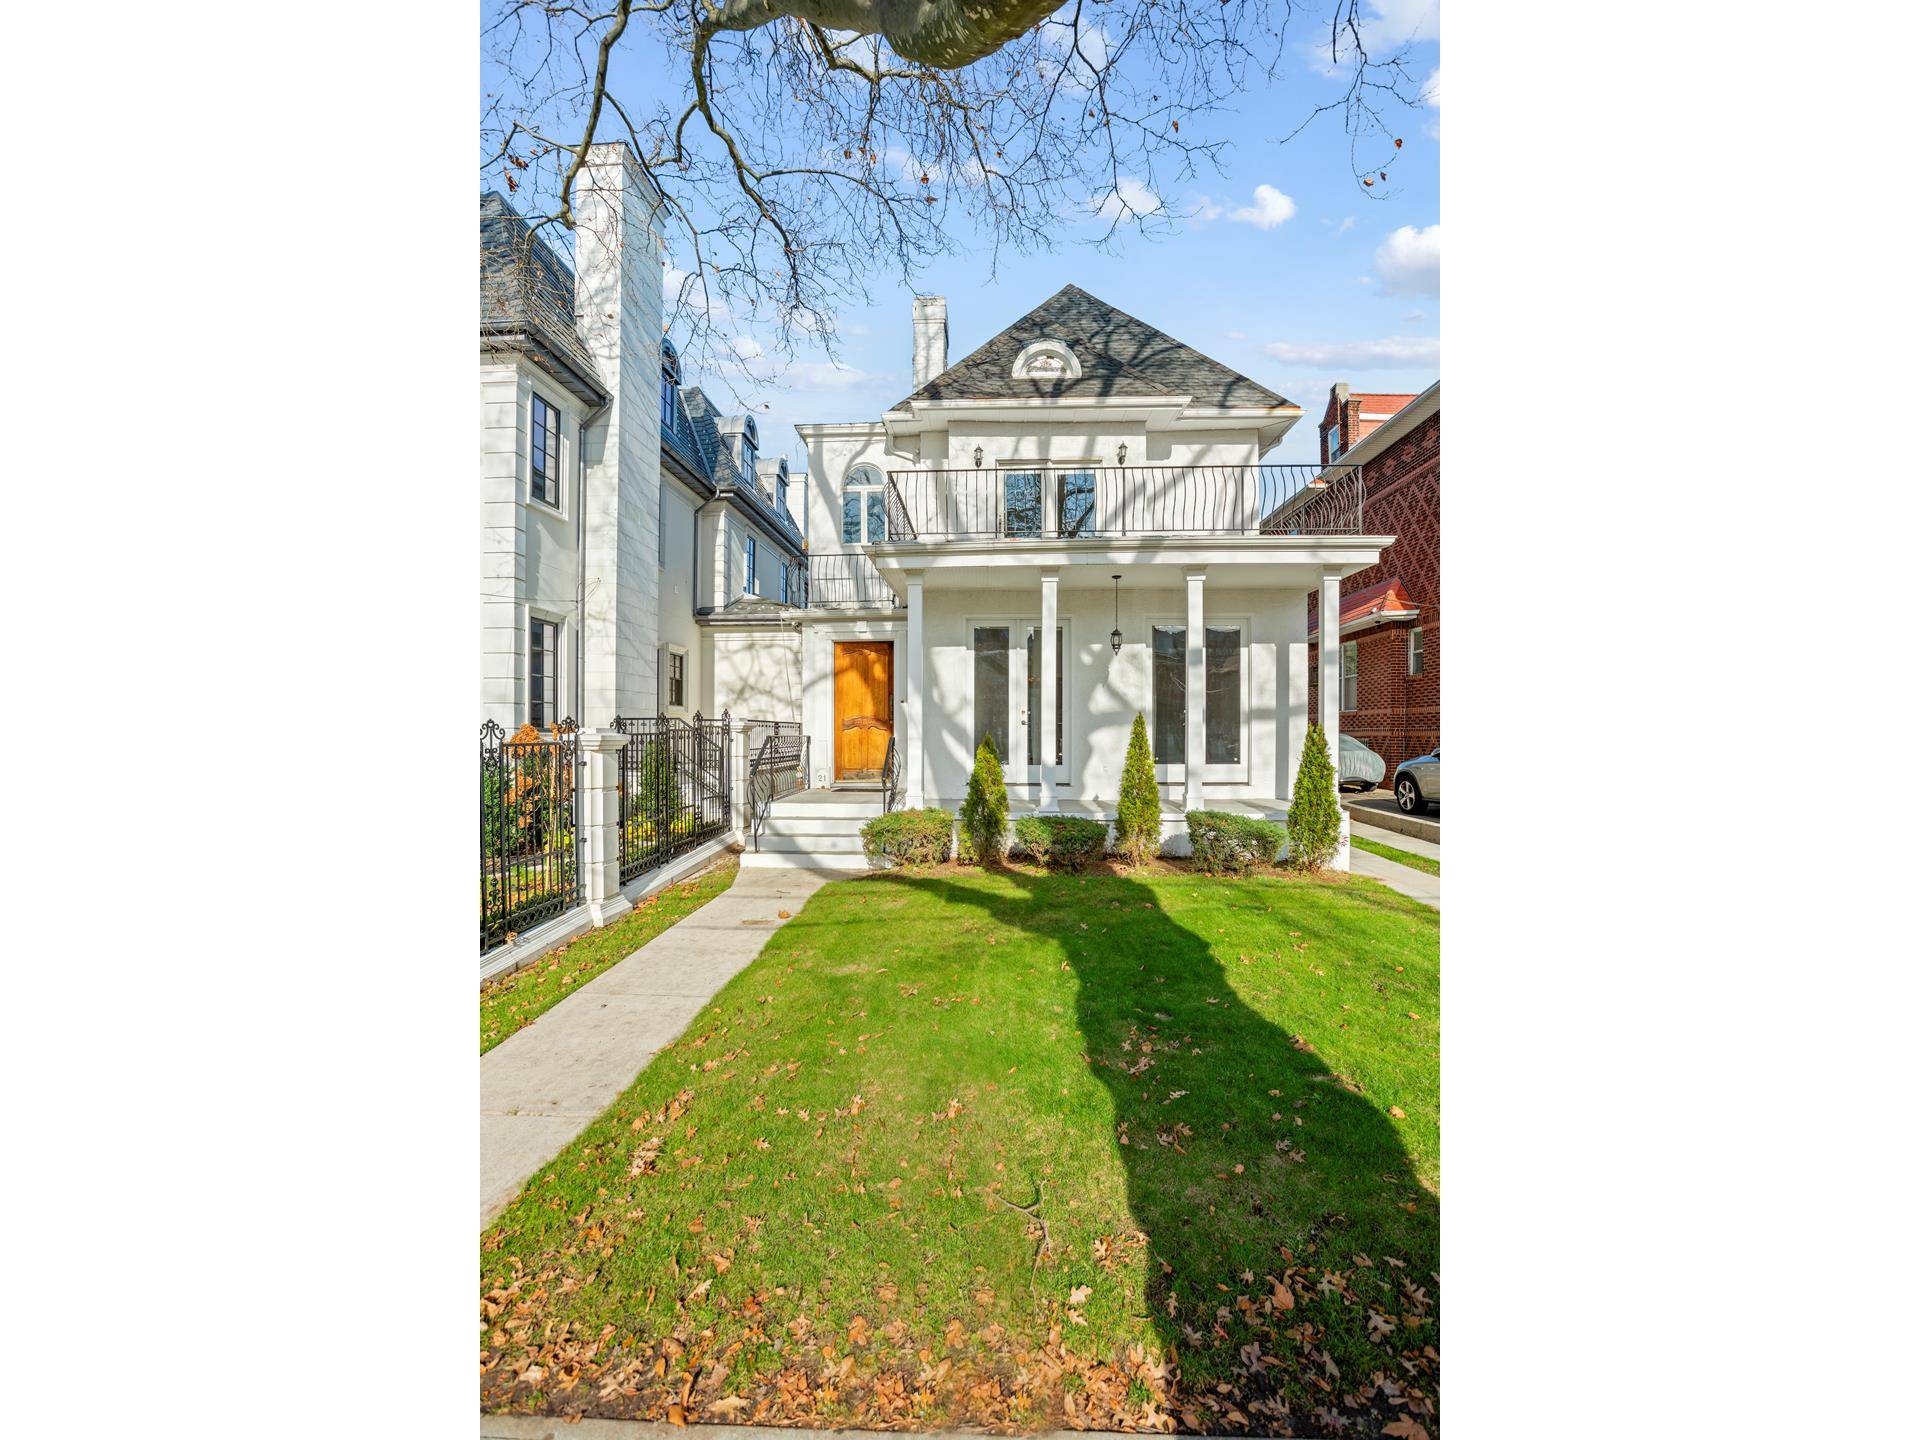 This amazing detached white stucco home sits on the best block in Bay Ridge, Brooklyn and has been a mainstay of the neighborhood since 1920 when it was built.